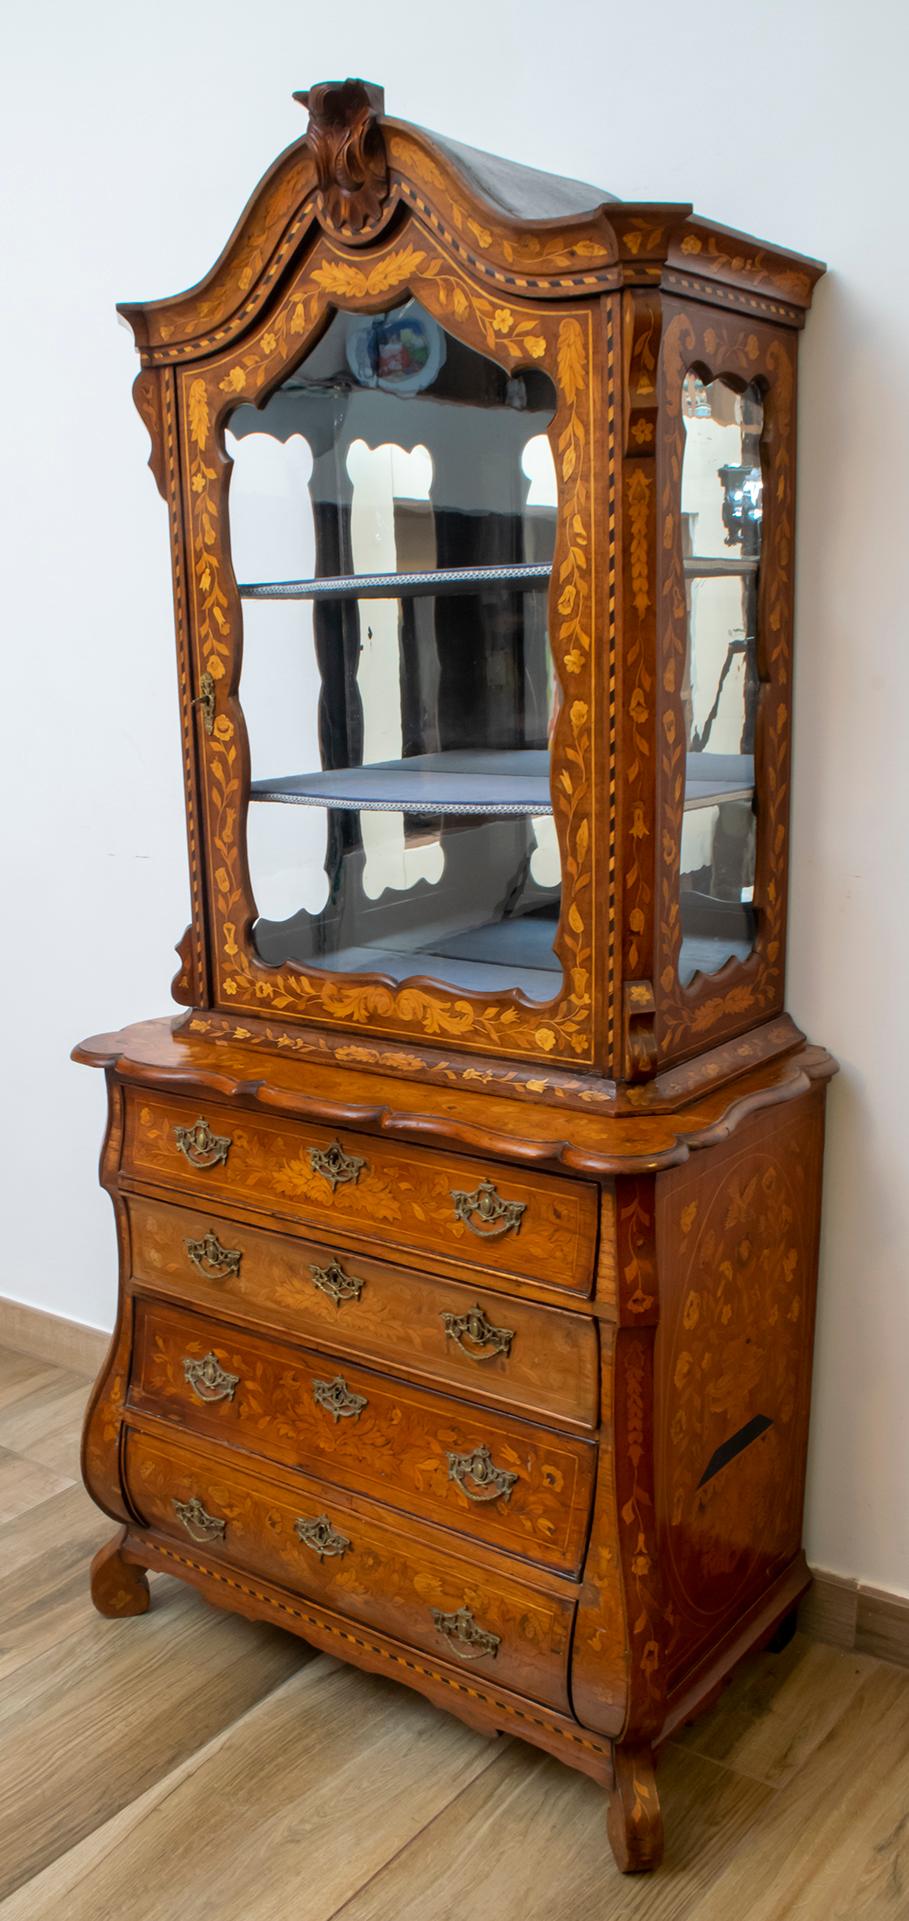 Louis XV 18th Century Dutch Trumeau Walnut with Maple Wood Inlays, Netherlands, 1760 For Sale